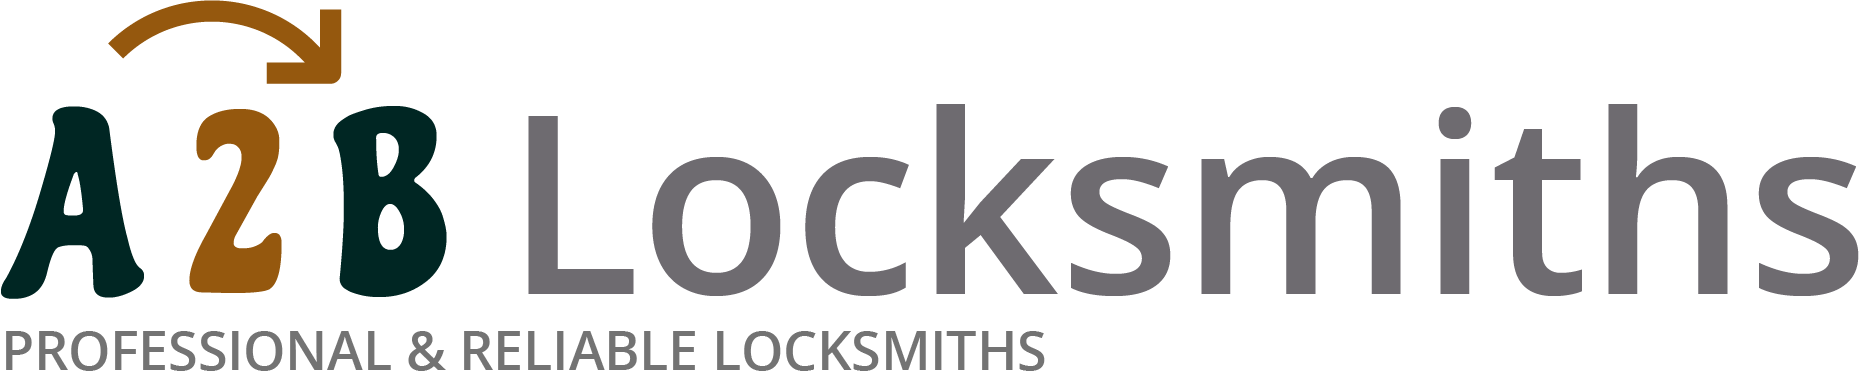 If you are locked out of house in Gateshead, our 24/7 local emergency locksmith services can help you.